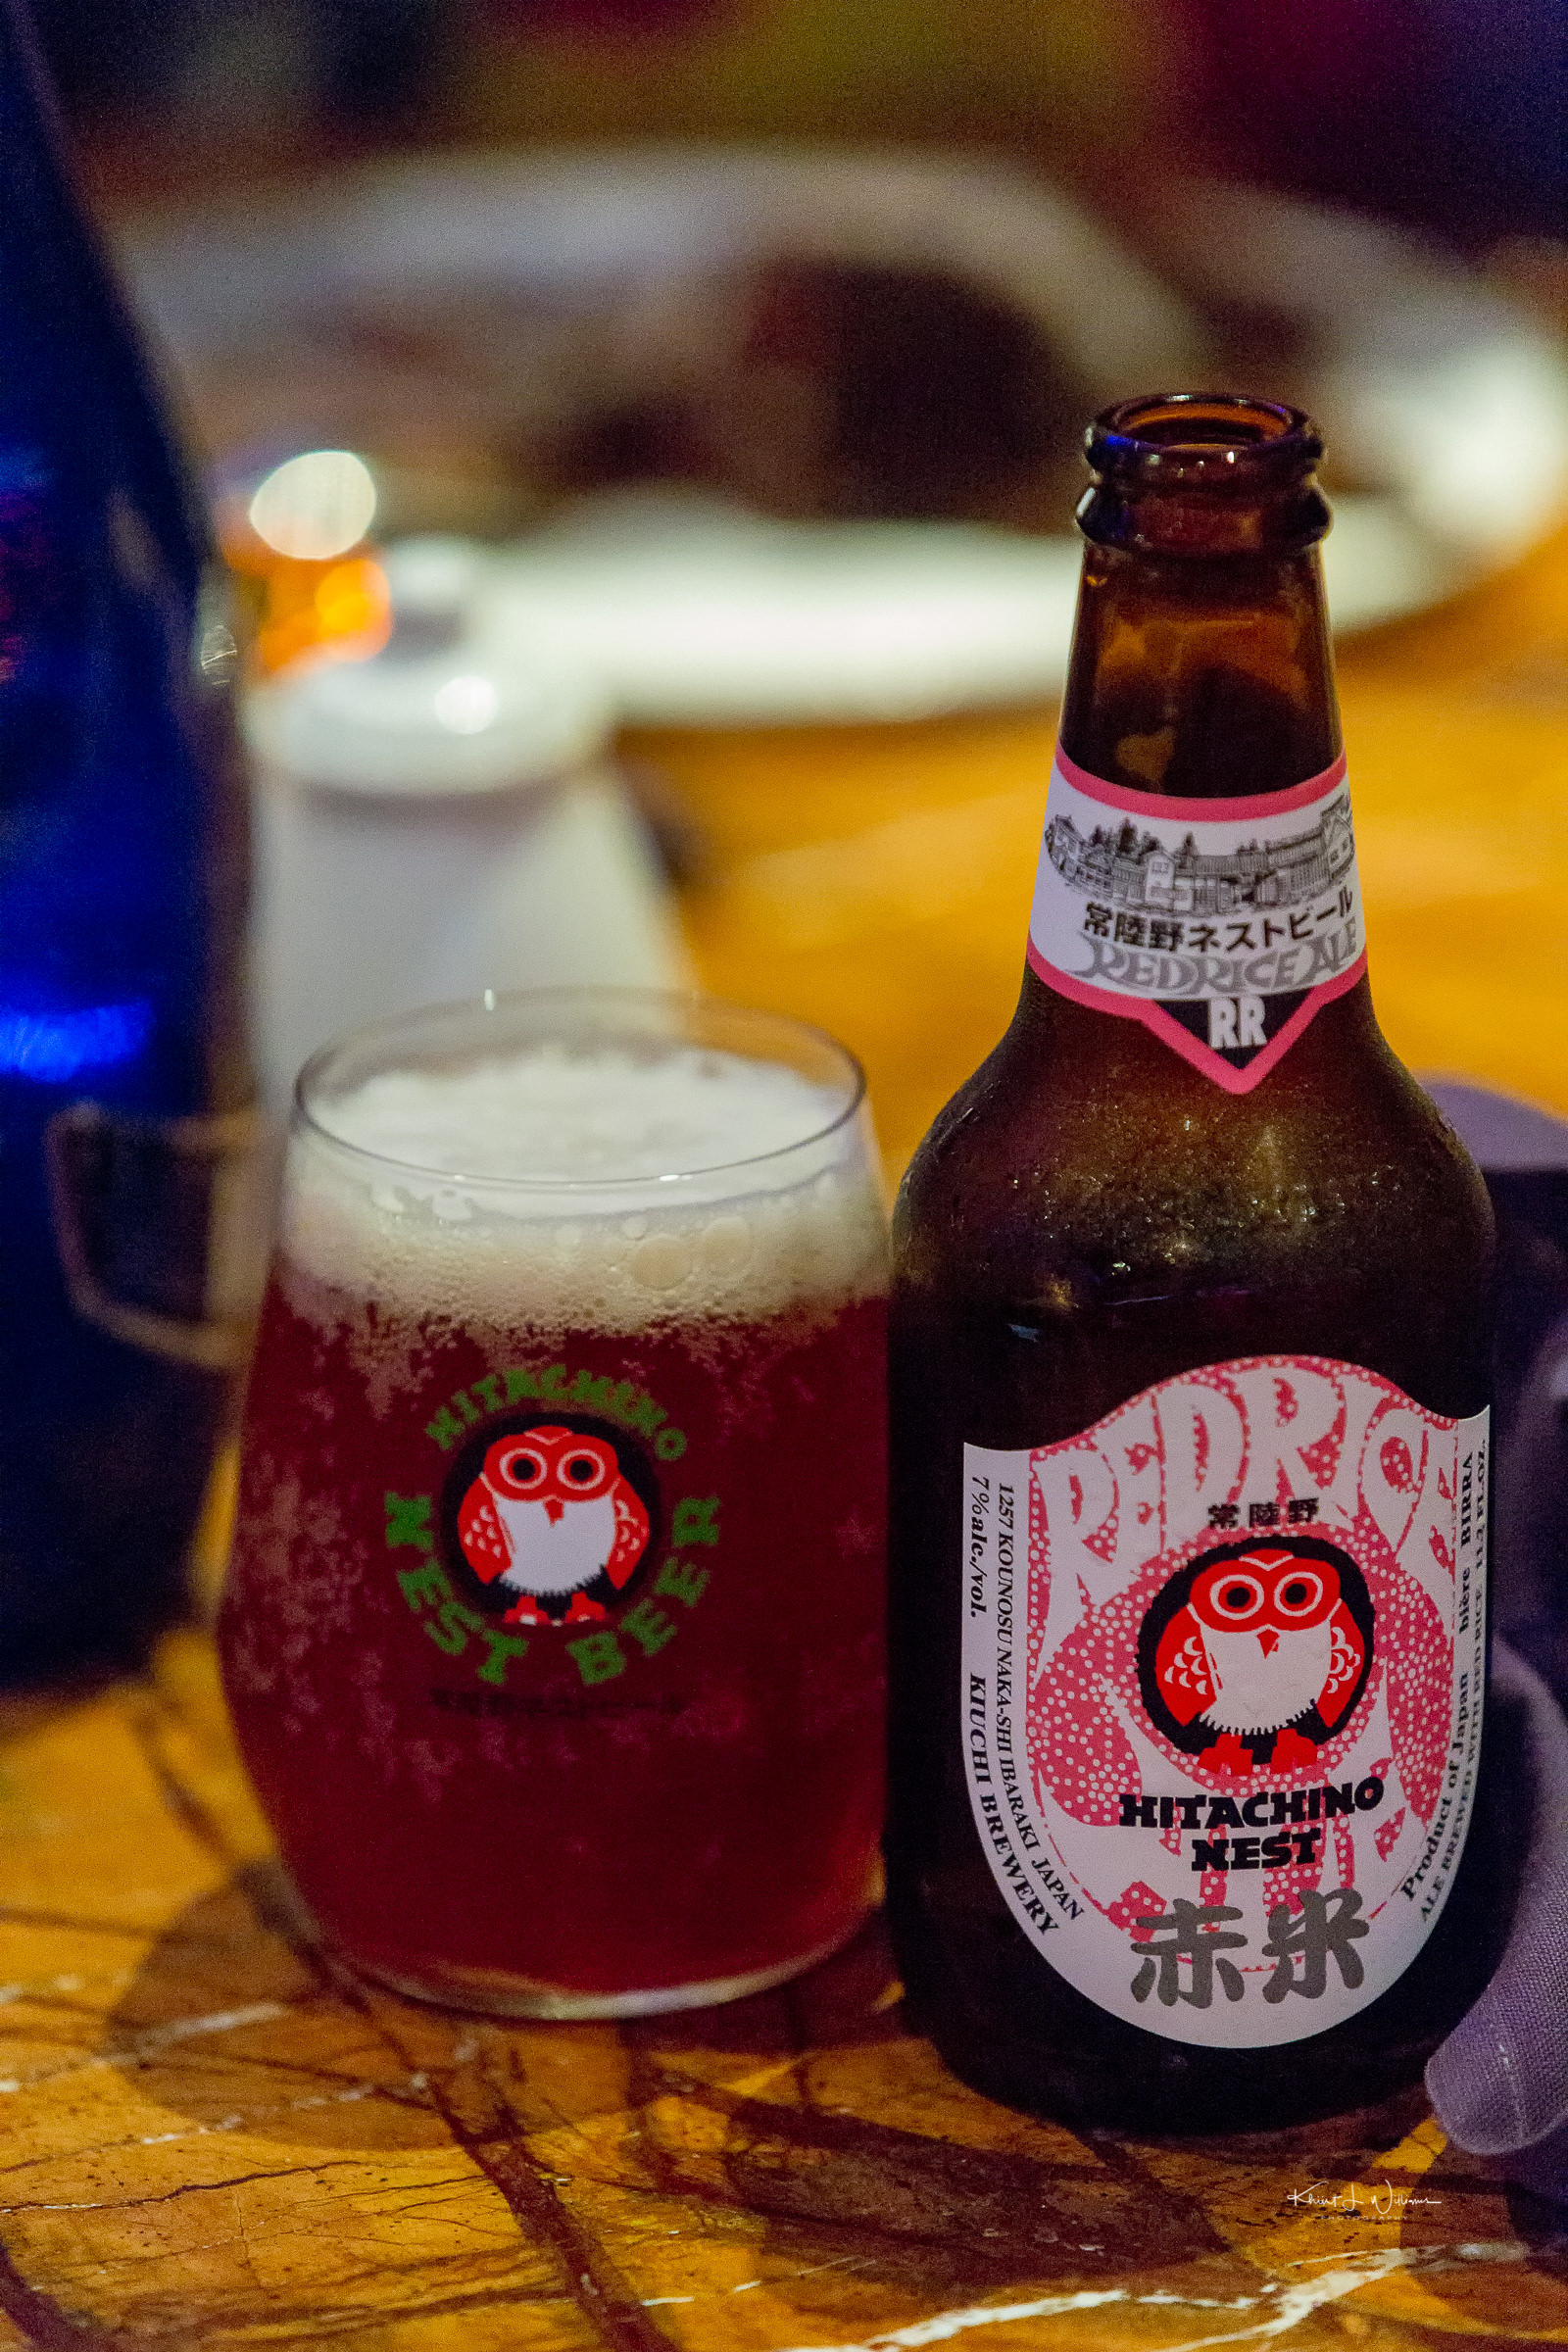 Red Rice Ale